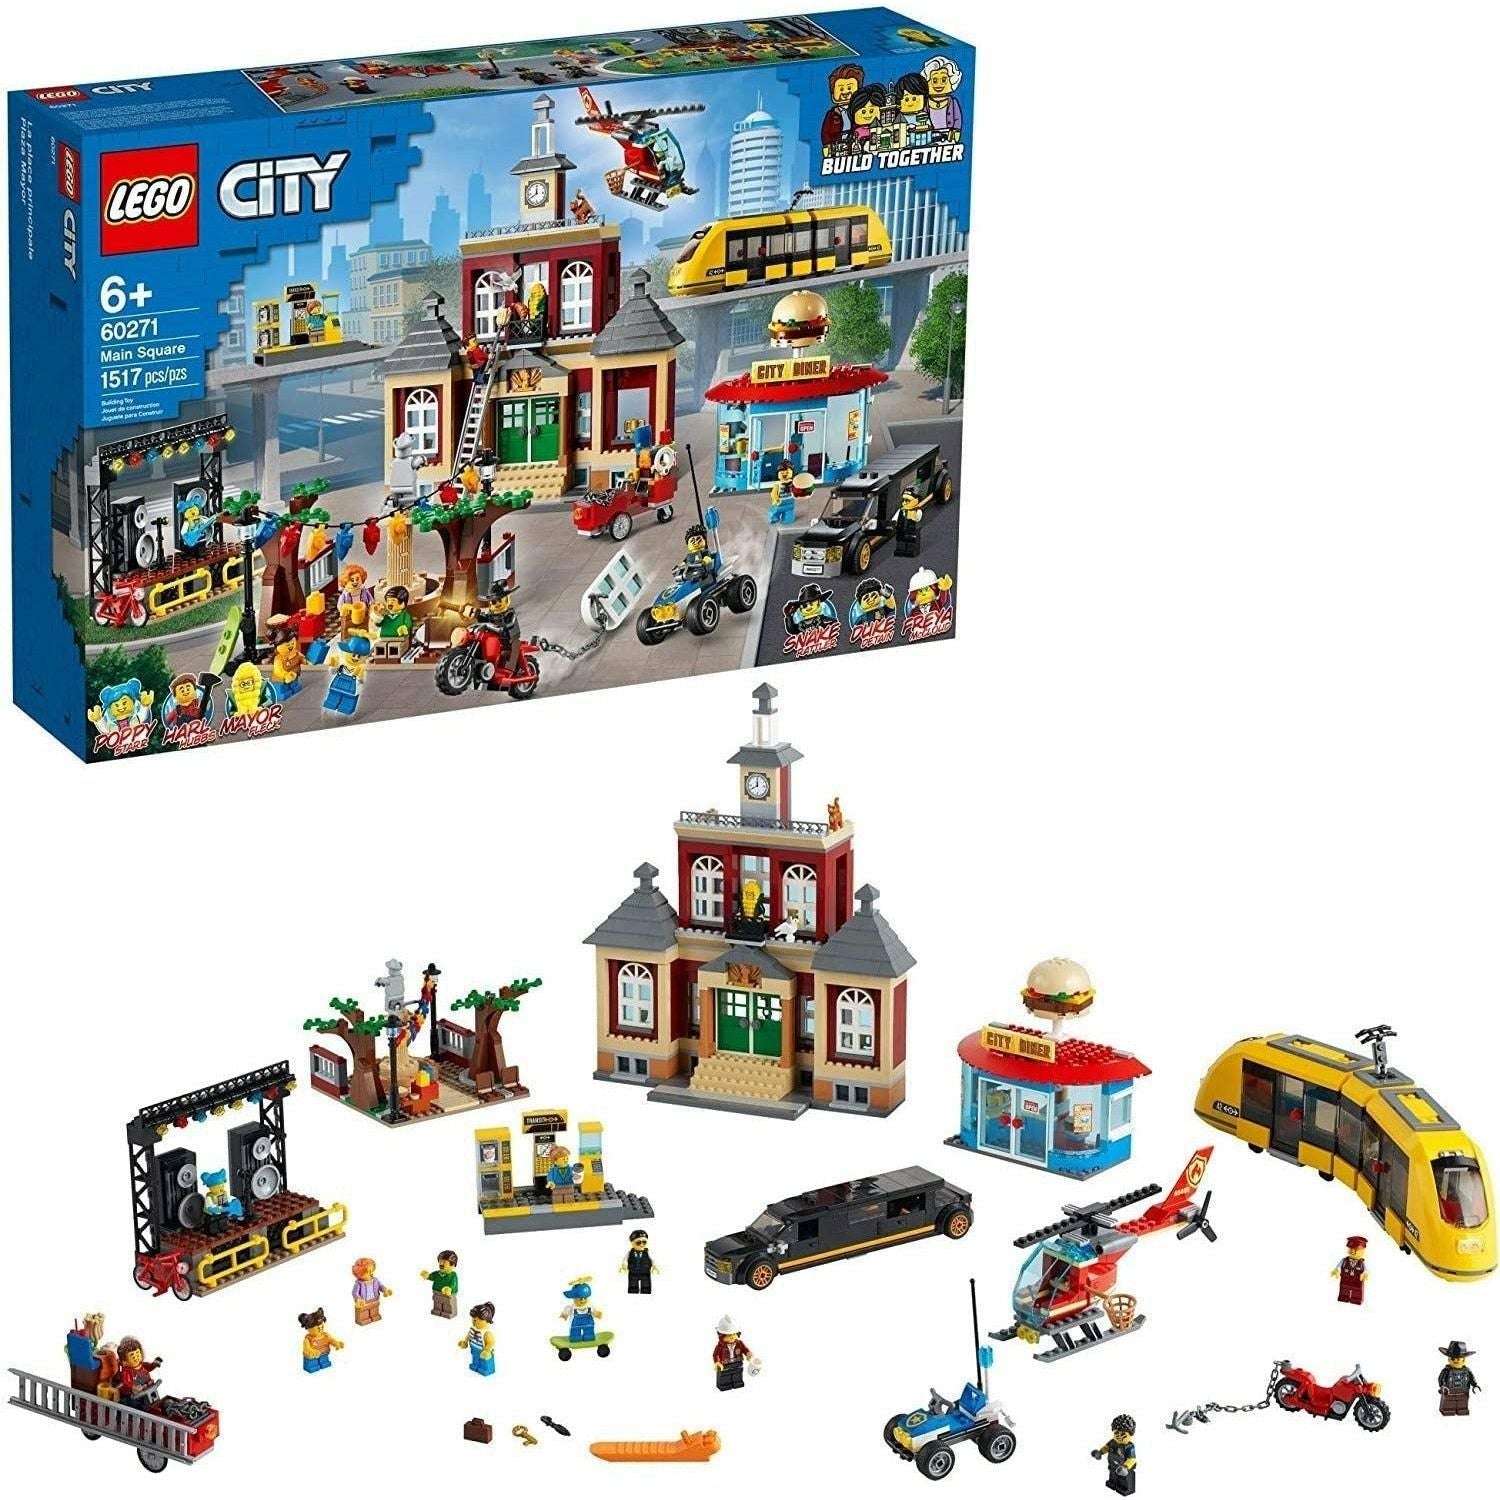 LEGO City Main Square 60271 Set, Cool Building Toy for Kids, New 2021 (1,517 Pieces) - BumbleToys - 5-7 Years, 6+ Years, Boys, City, LEGO, OXE, Pre-Order